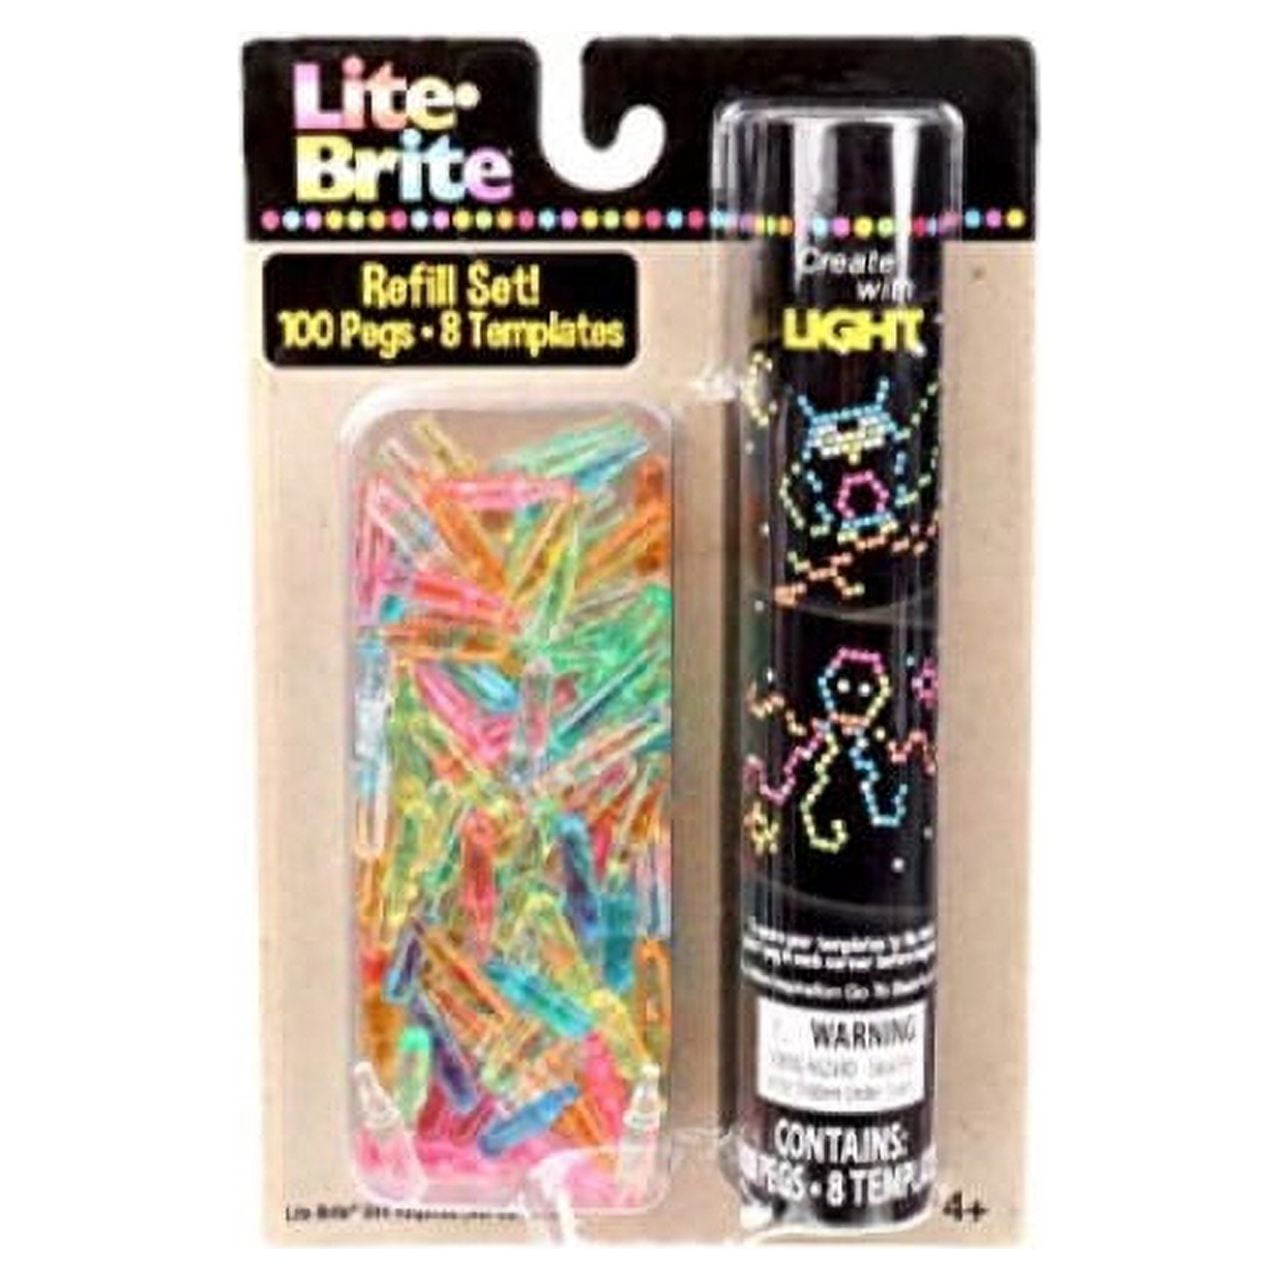 Lite-Brite Wall Art Pop Wow- 16 inch x 16 inch, 6,000 Mini Pegs, 3 HD Designs, Great Gift for Ages 14+, Create & Display, 02338